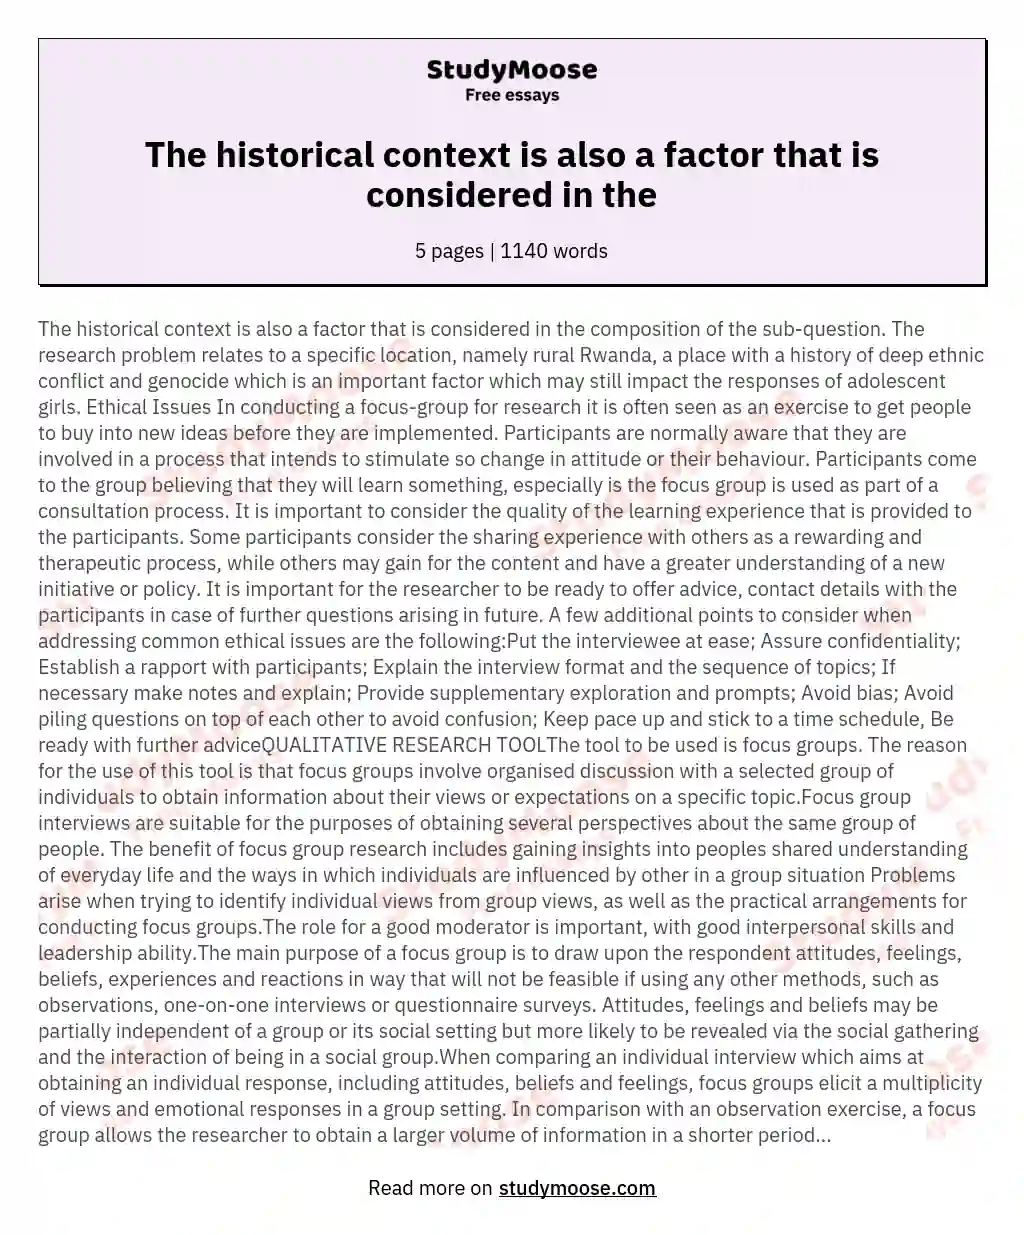 The historical context is also a factor that is considered in the essay